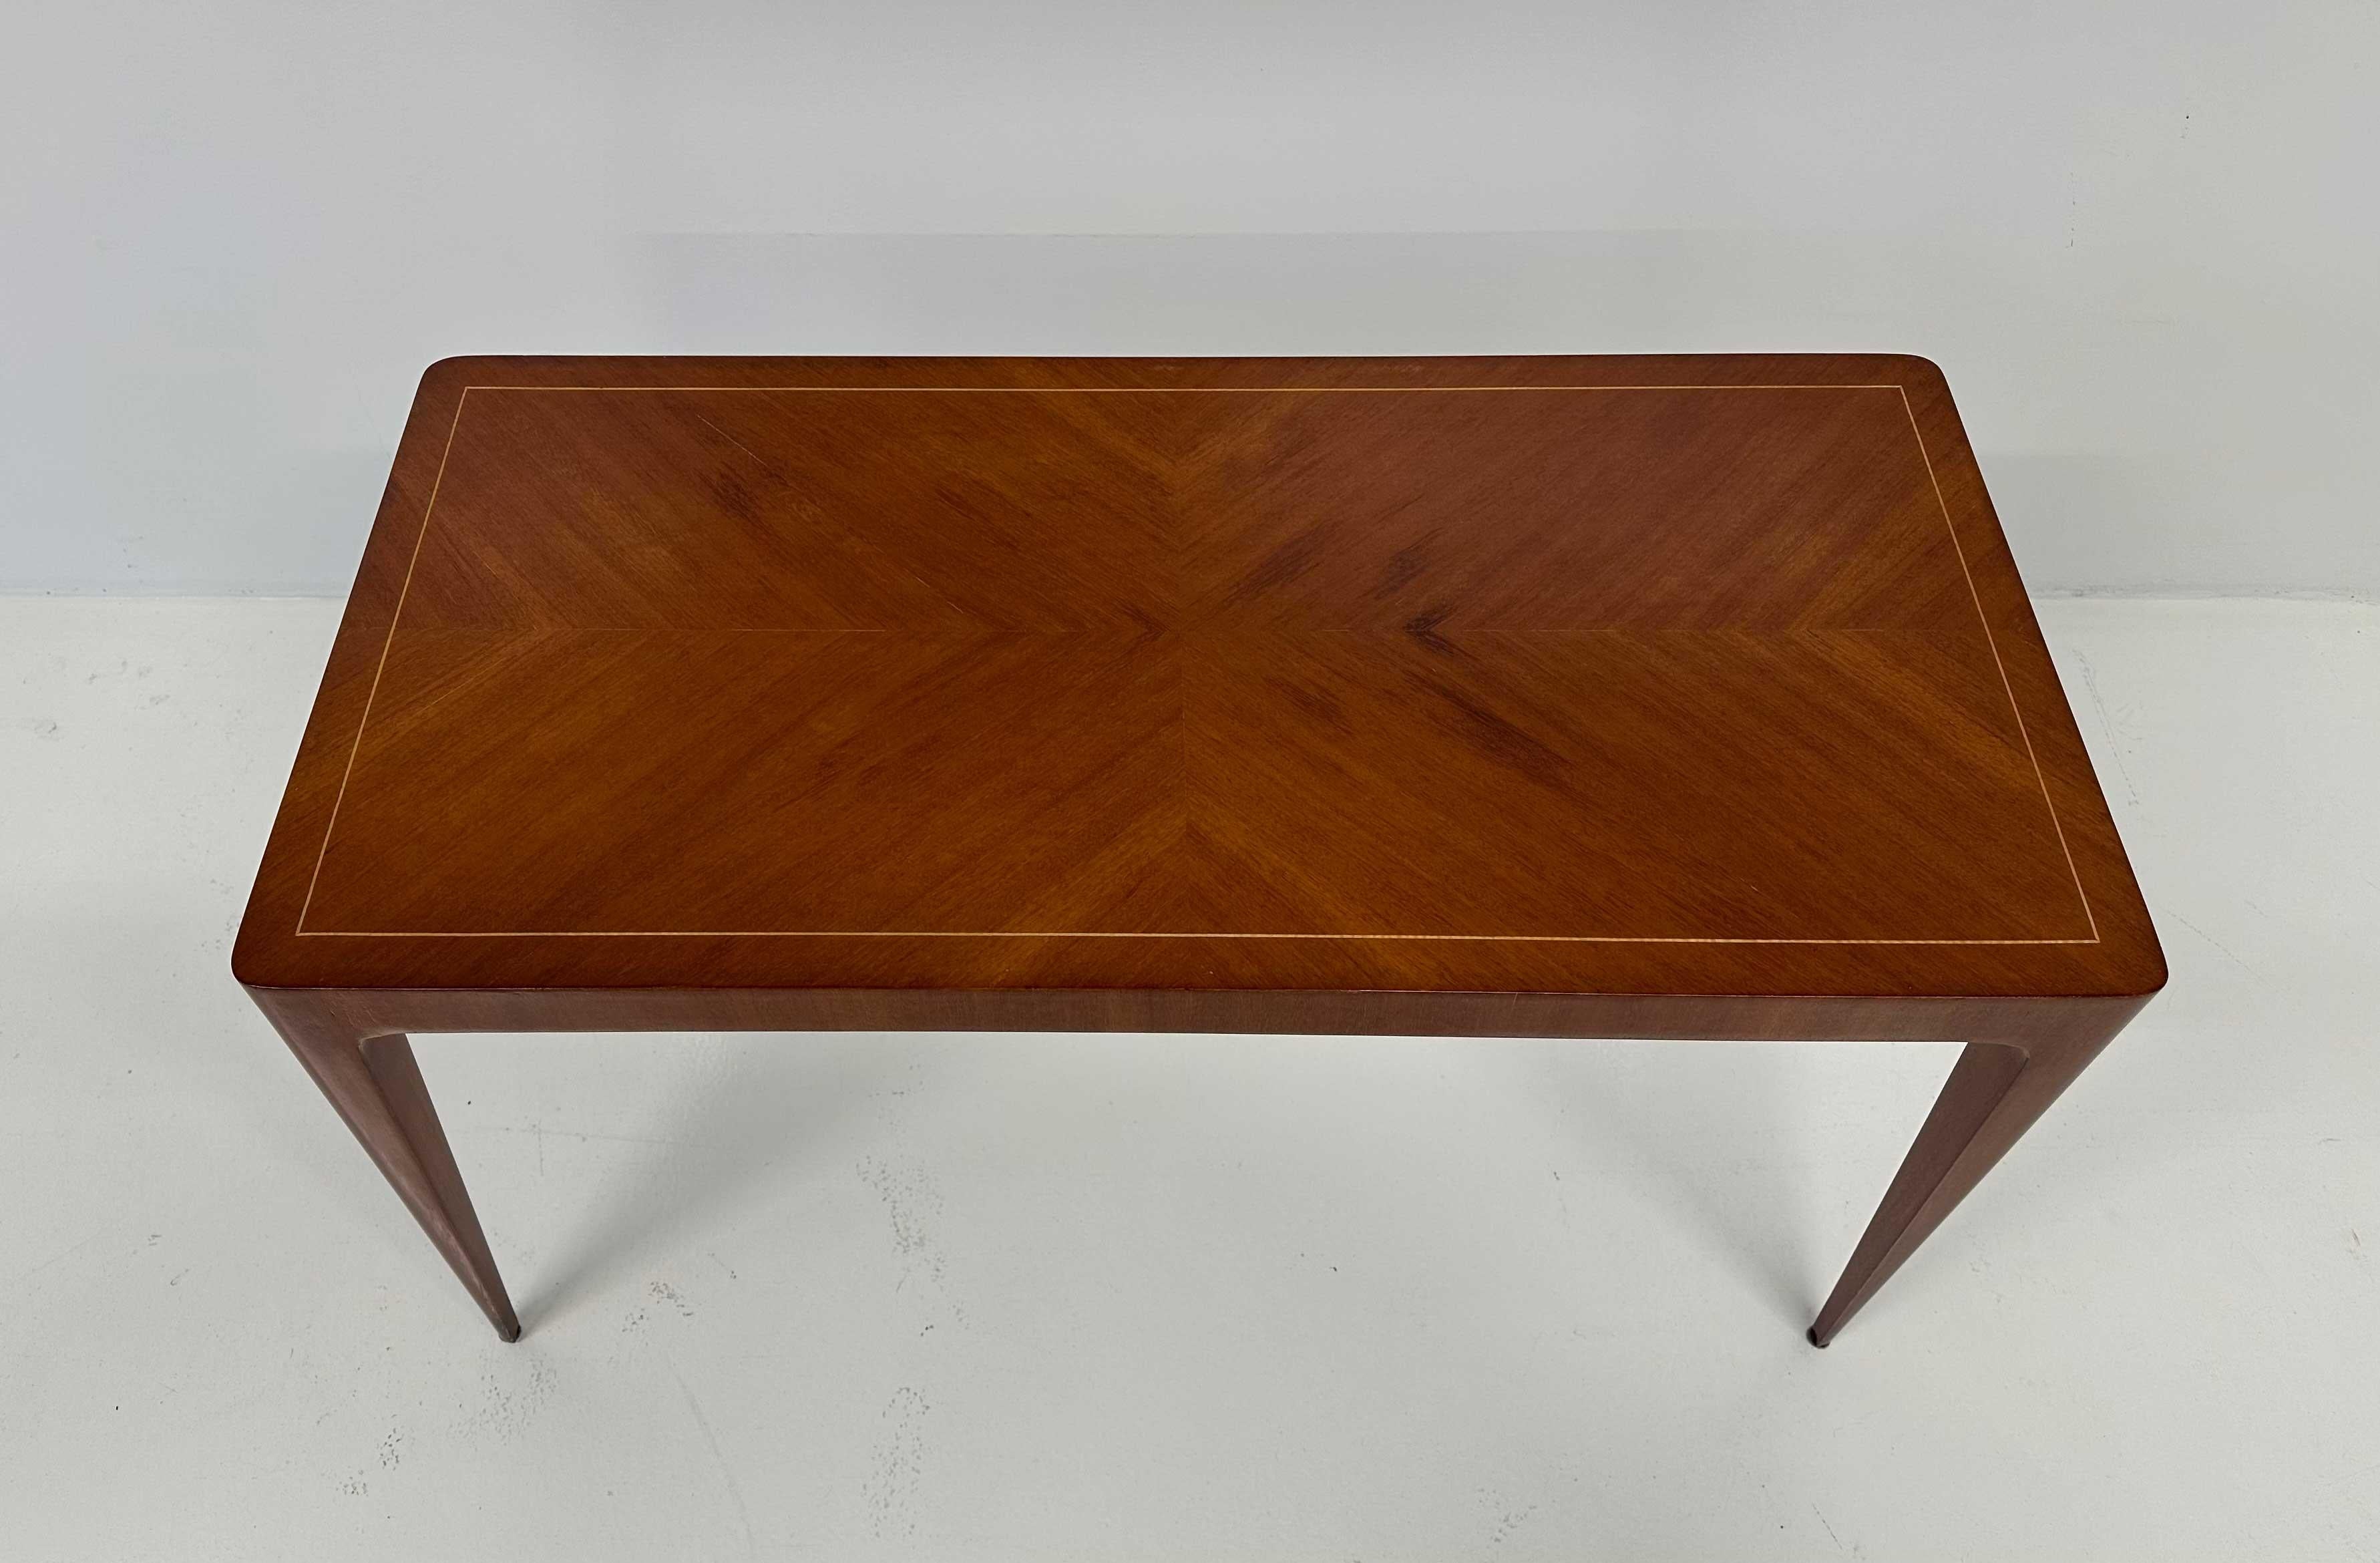 Italian Art Deco Teak and Maple Coffee Table By Paolo Buffa , 1950s For Sale 1